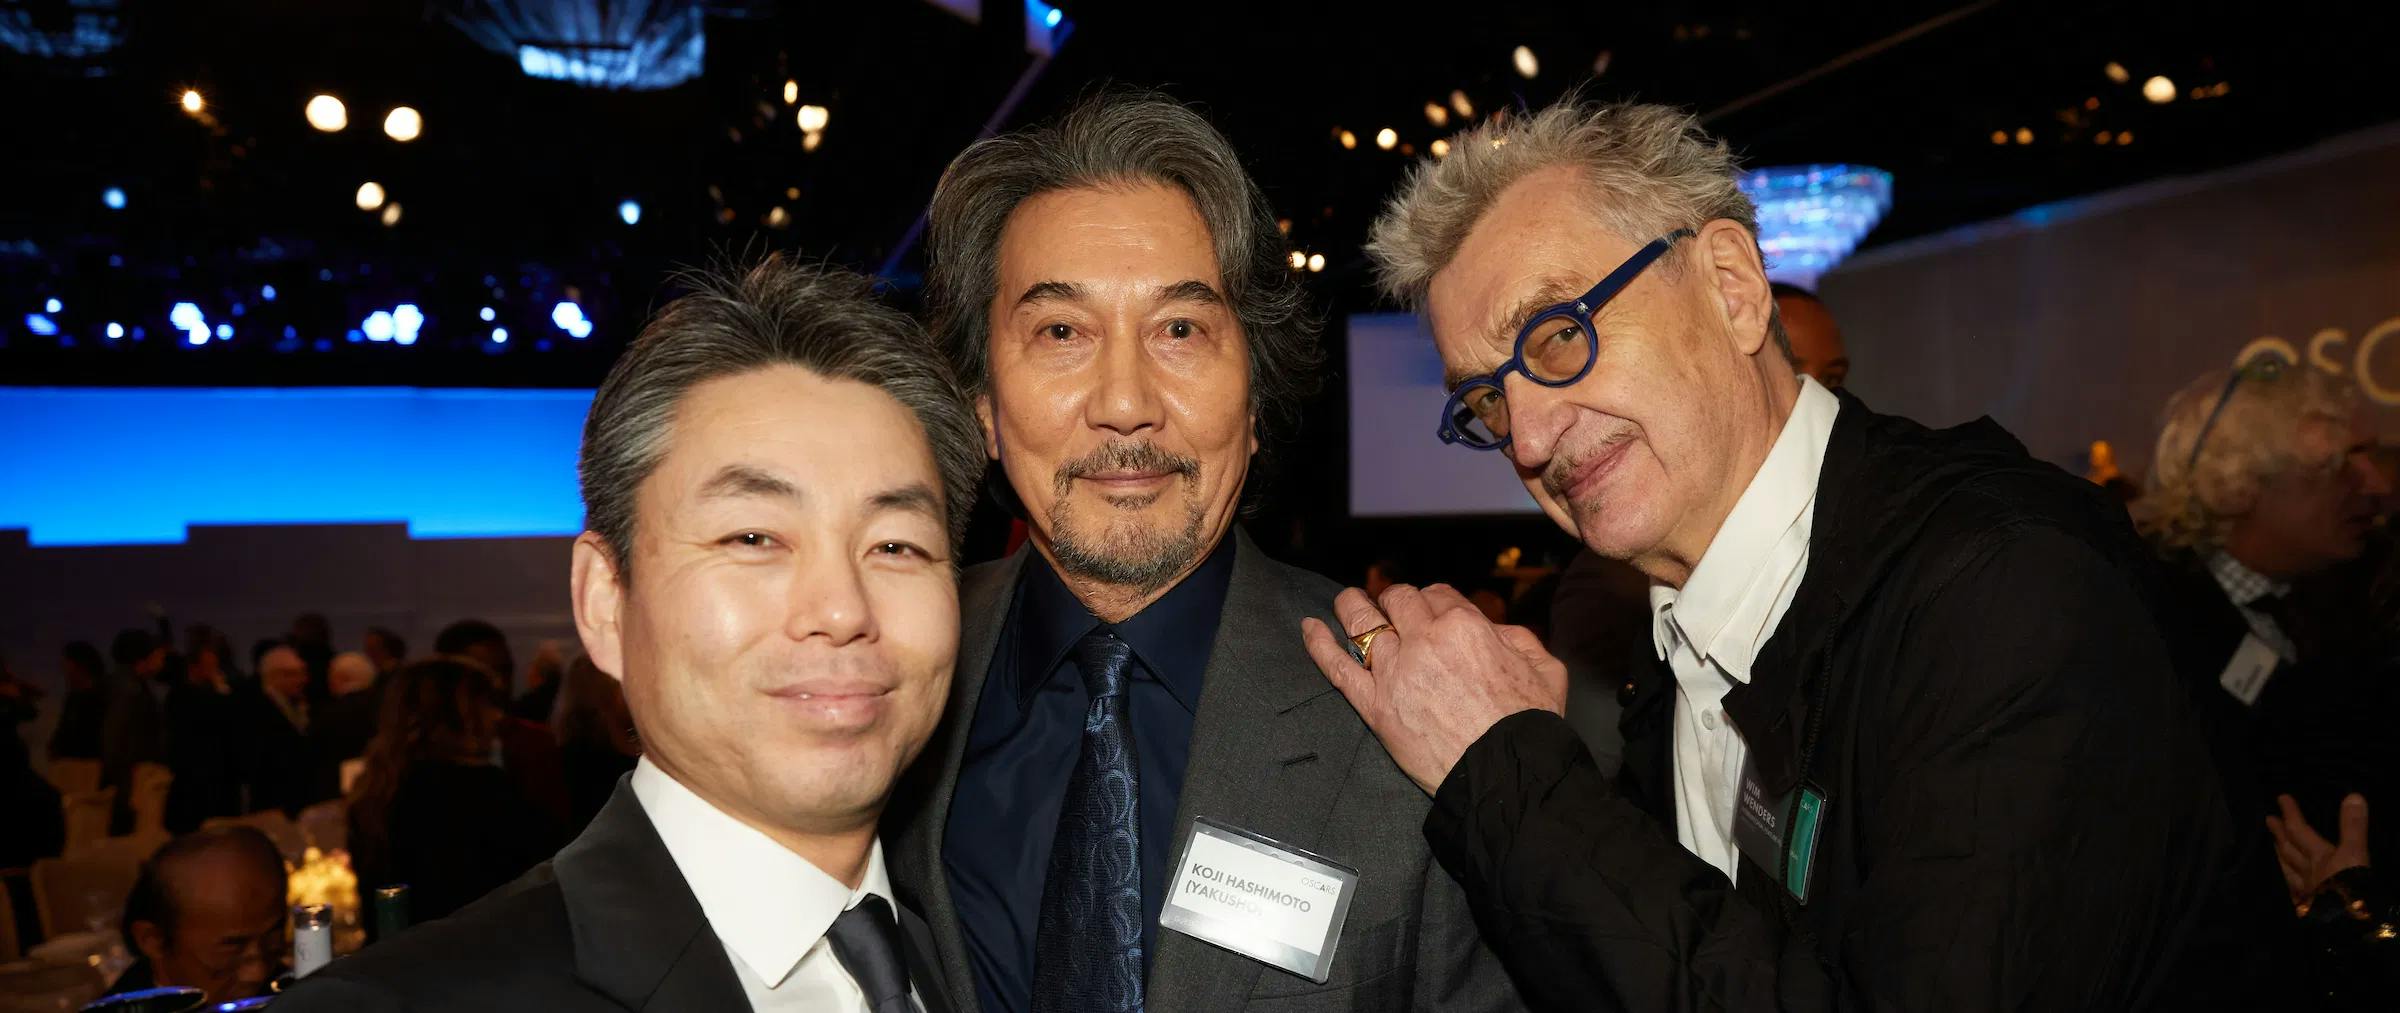 "Perfect Days" team: producer Koji Yanai, actor Koji Yakuzo, and German director Wim Wenders at the Oscar Nominees Luncheon. / Photo by Al Seib, courtesy of ©A.M.P.A.S.